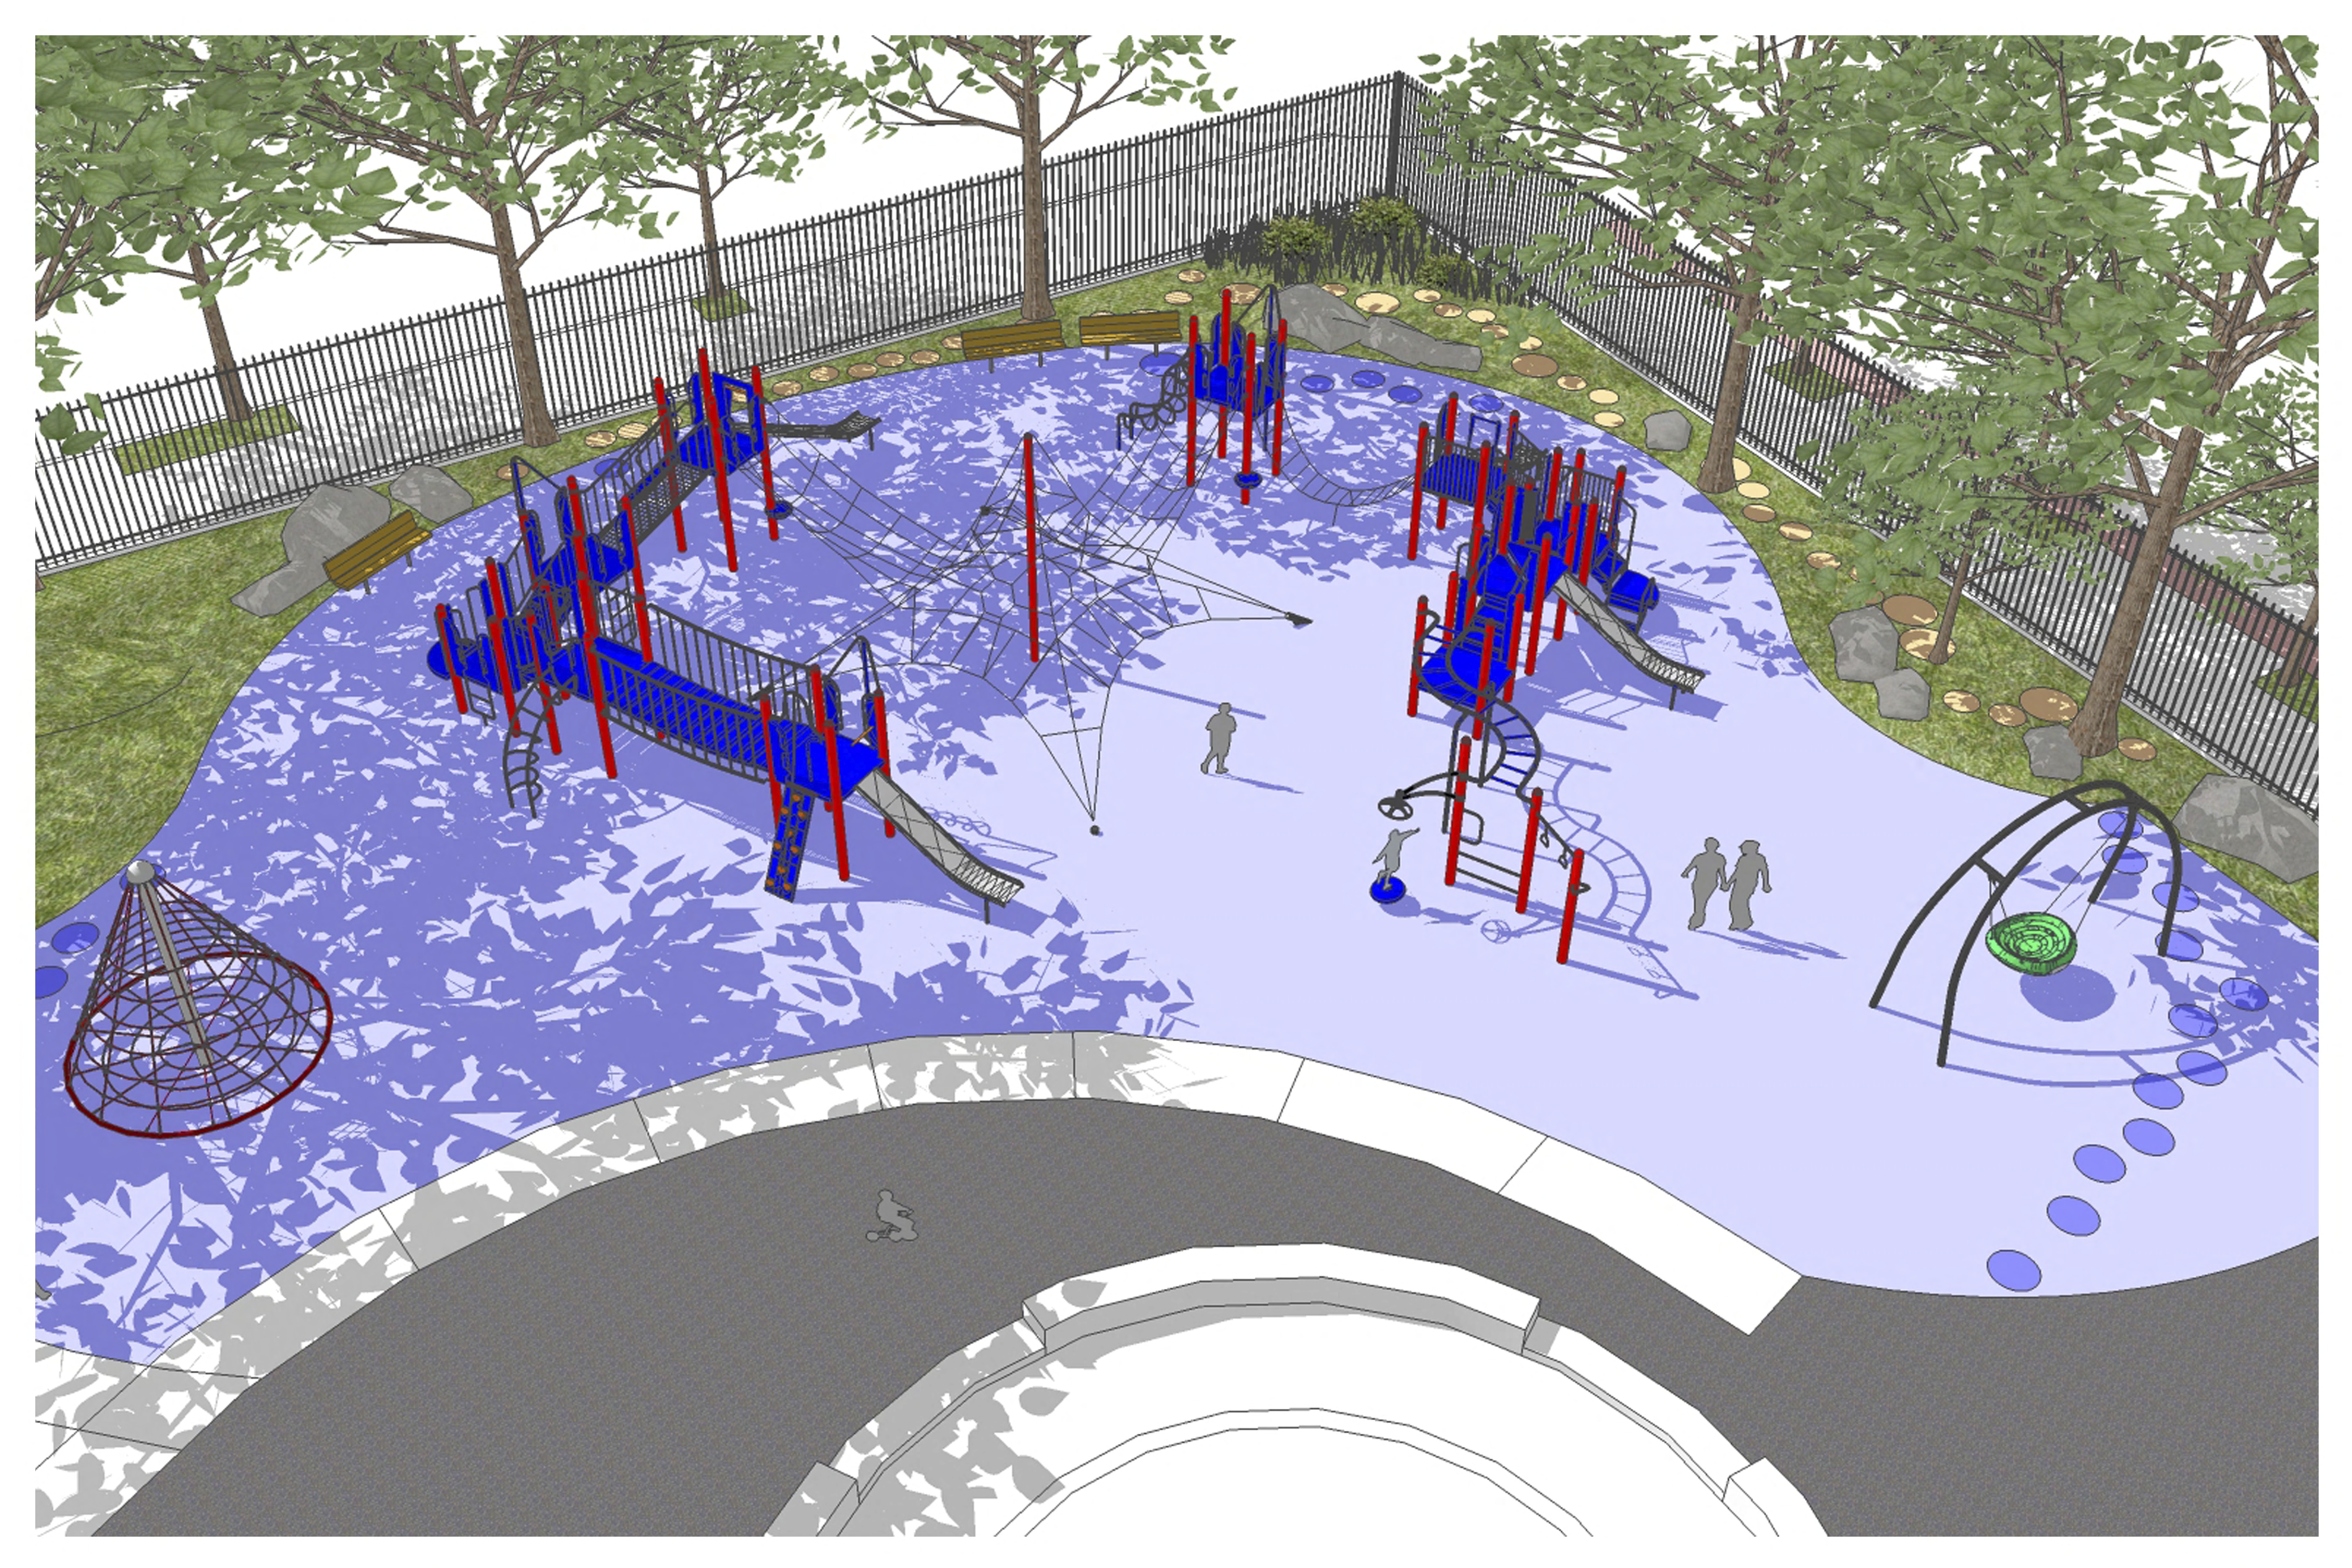 Seger Park's new big kid play area. | Friends of Seger Park Playground